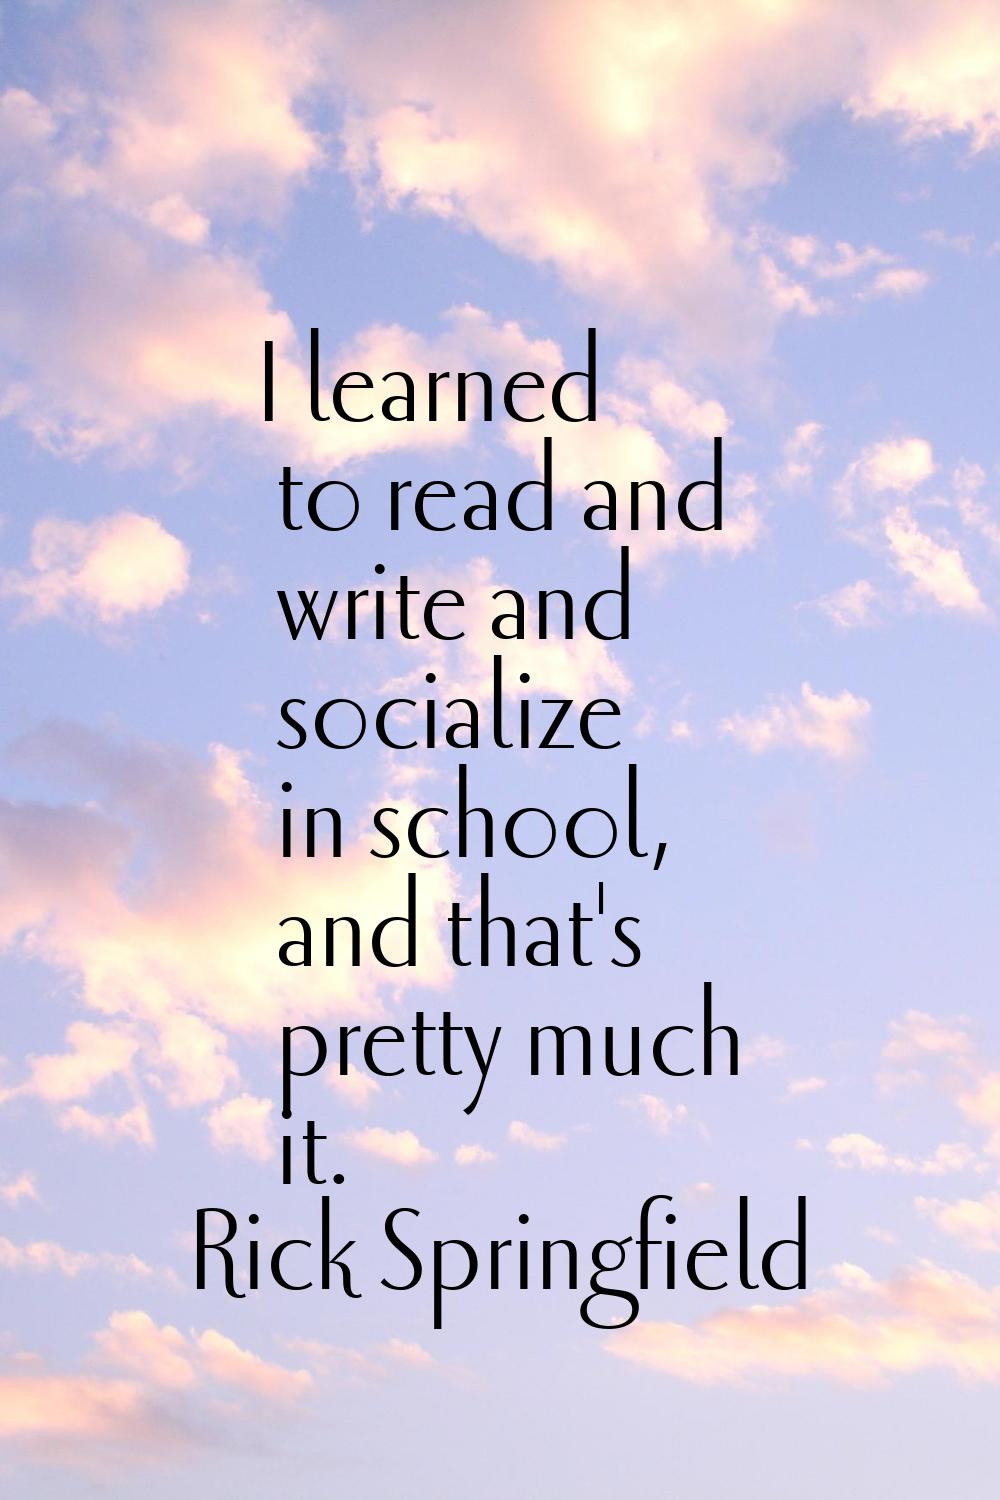 I learned to read and write and socialize in school, and that's pretty much it.